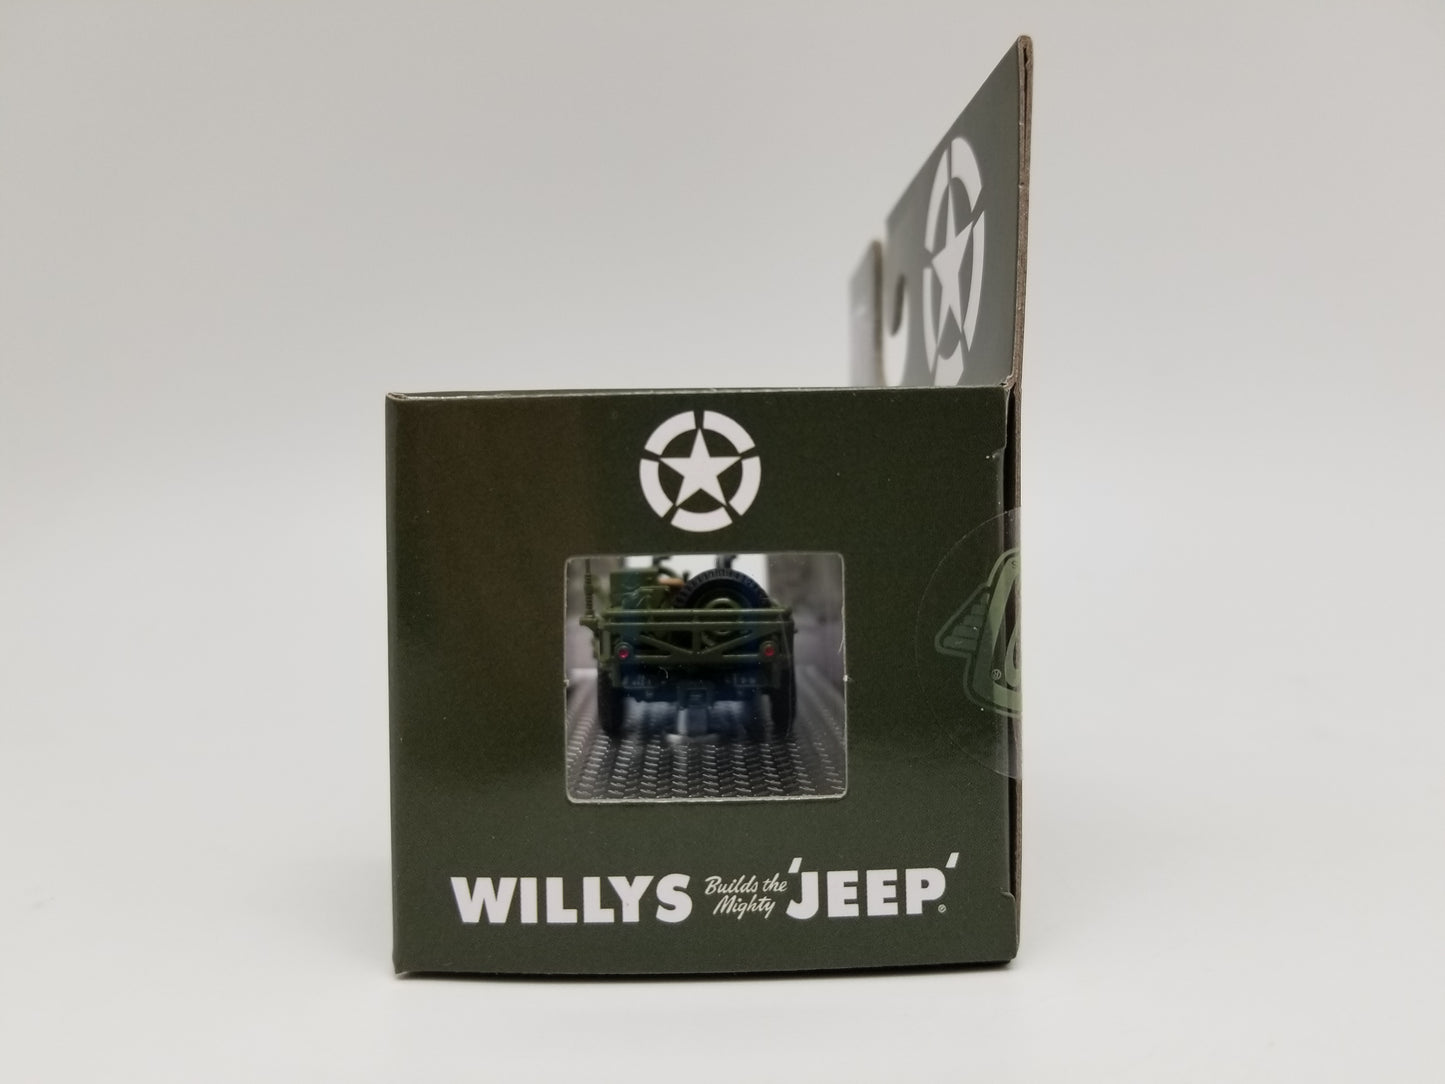 M2 1944 Willys Jeep MB - Go ARMY MB